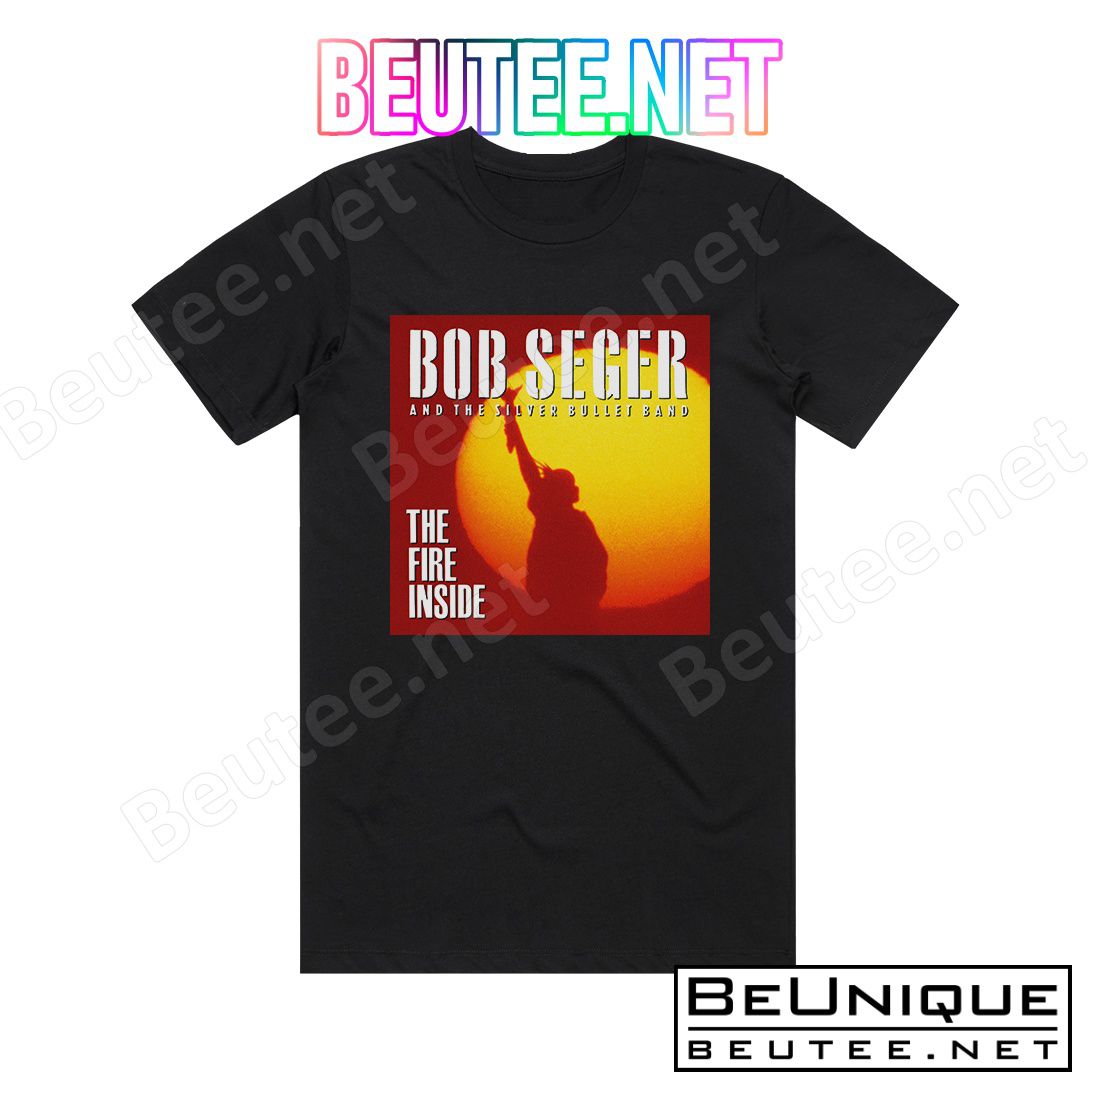 Bob Seger and The Silver Bullet Band The Fire Inside Album Cover T-Shirt